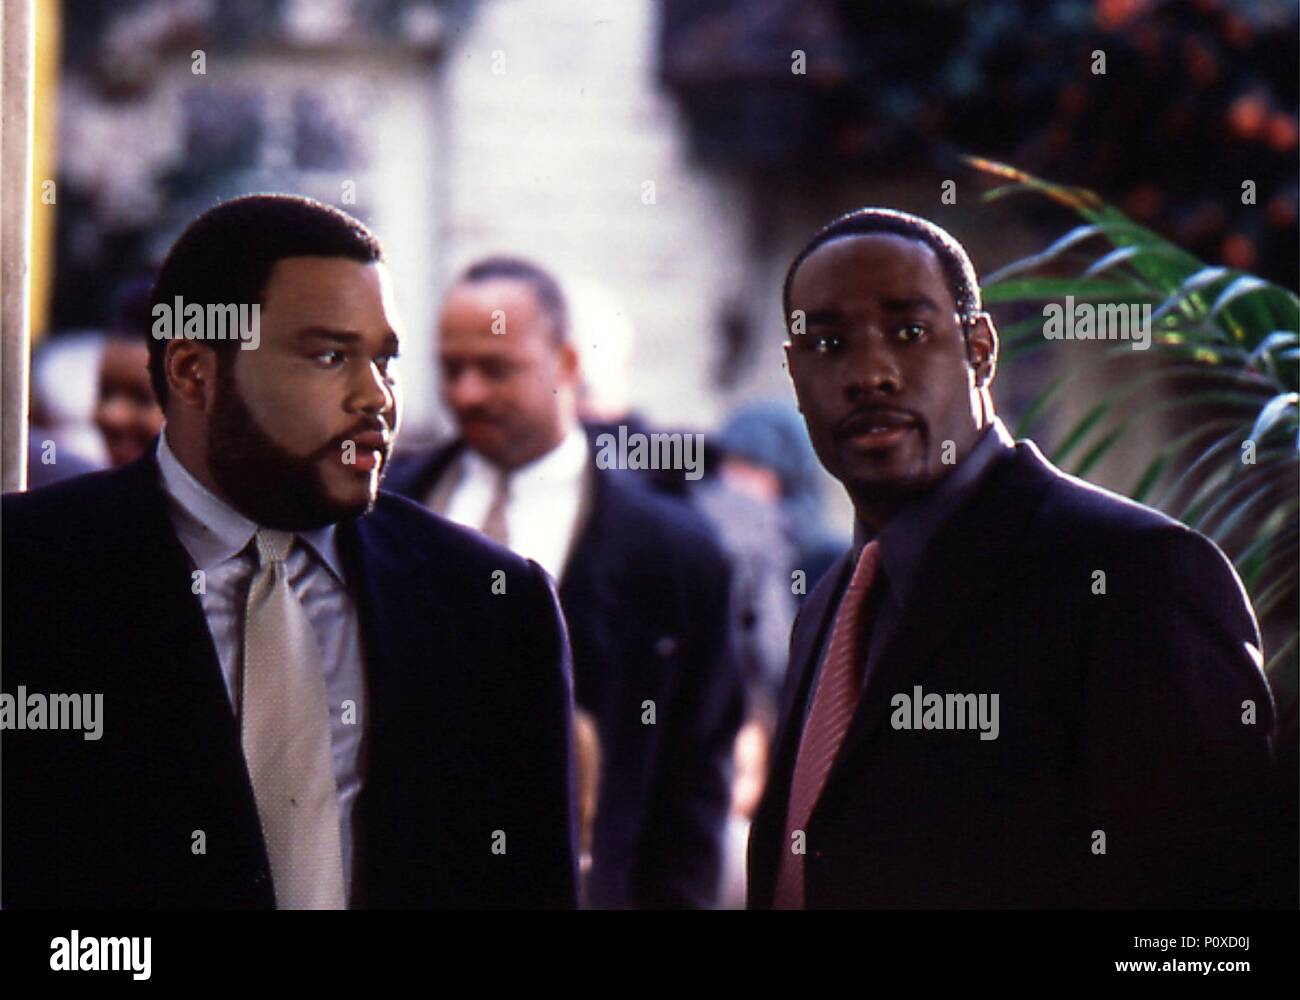 Original Film Title: TWO CAN PLAY THE GAME.  English Title: TWO CAN PLAY THE GAME.  Film Director: MARK BROWN.  Year: 2001.  Stars: MORRIS CHESTNUT; ANTHONY ANDERSON. Credit: COLUMBIA PICTURES / Album Stock Photo